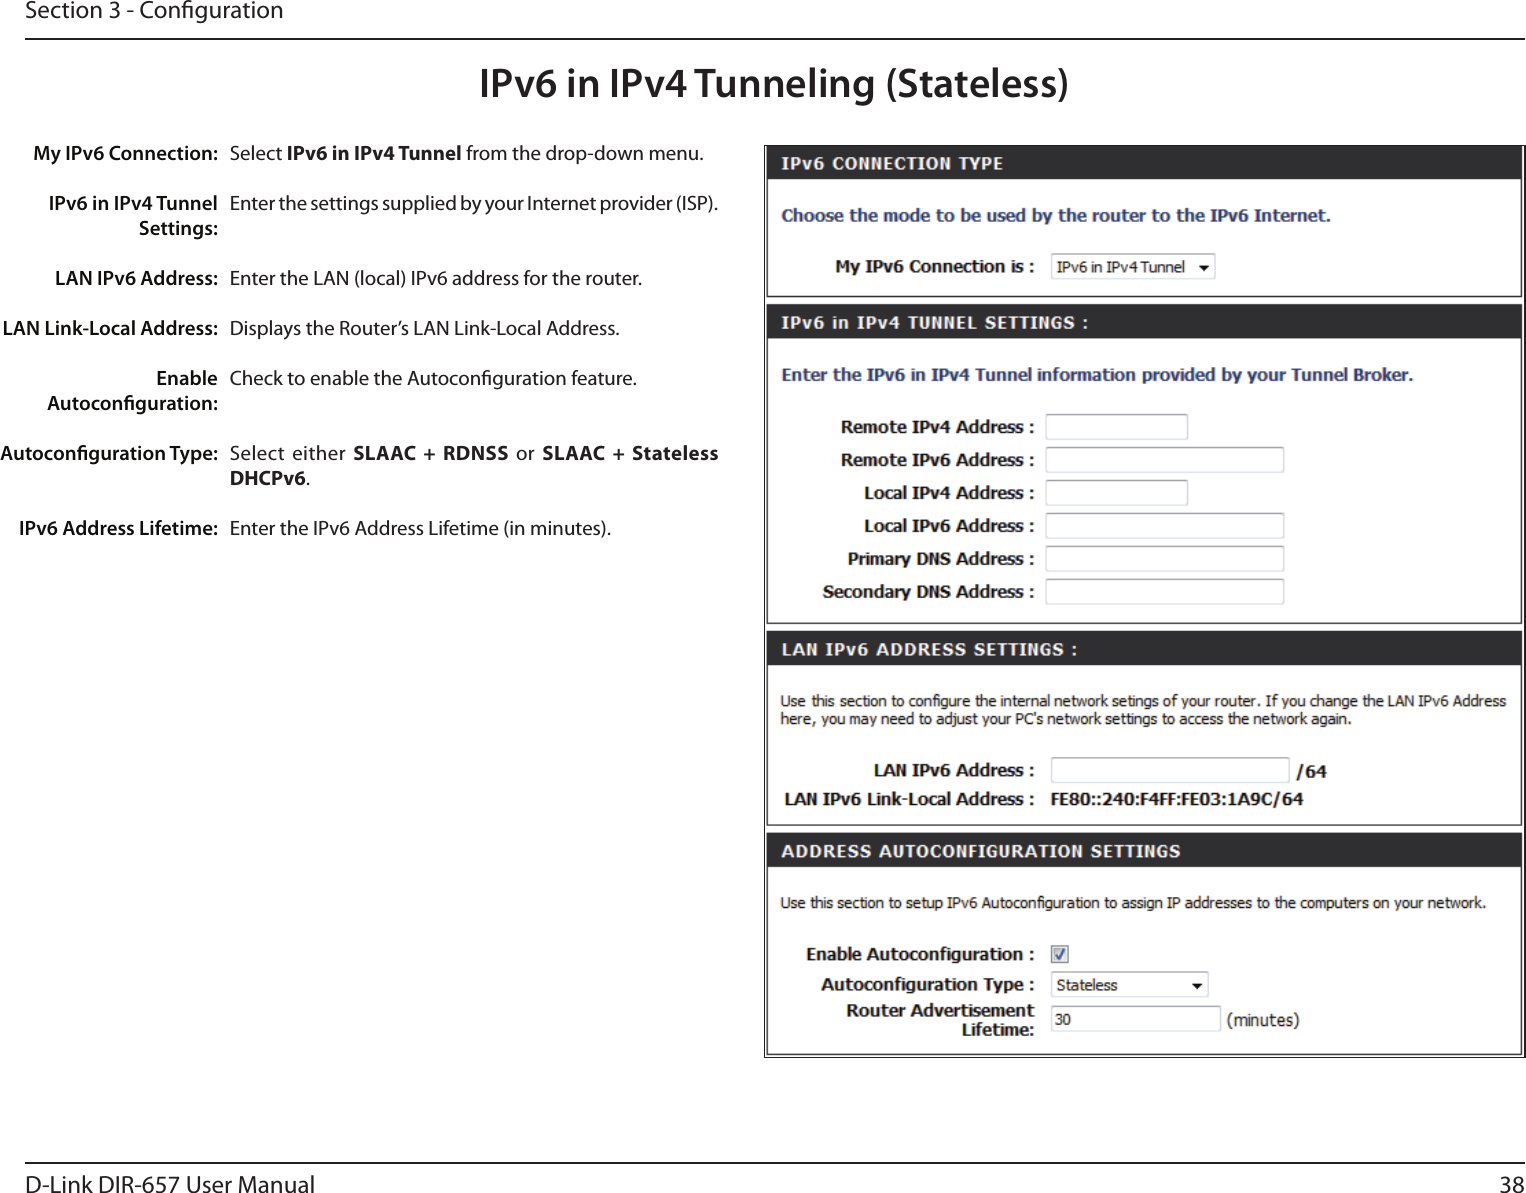 38D-Link DIR-657 User ManualSection 3 - CongurationIPv6 in IPv4 Tunneling (Stateless)Select IPv6 in IPv4 Tunnel from the drop-down menu.Enter the settings supplied by your Internet provider (ISP). Enter the LAN (local) IPv6 address for the router. Displays the Router’s LAN Link-Local Address.Check to enable the Autoconguration feature.Select  either  SLAAC + RDNSS  or  SLAAC  +  Stateless DHCPv6. Enter the IPv6 Address Lifetime (in minutes).My IPv6 Connection:IPv6 in IPv4 Tunnel Settings:LAN IPv6 Address:LAN Link-Local Address:Enable Autoconguration:Autoconguration Type:IPv6 Address Lifetime: